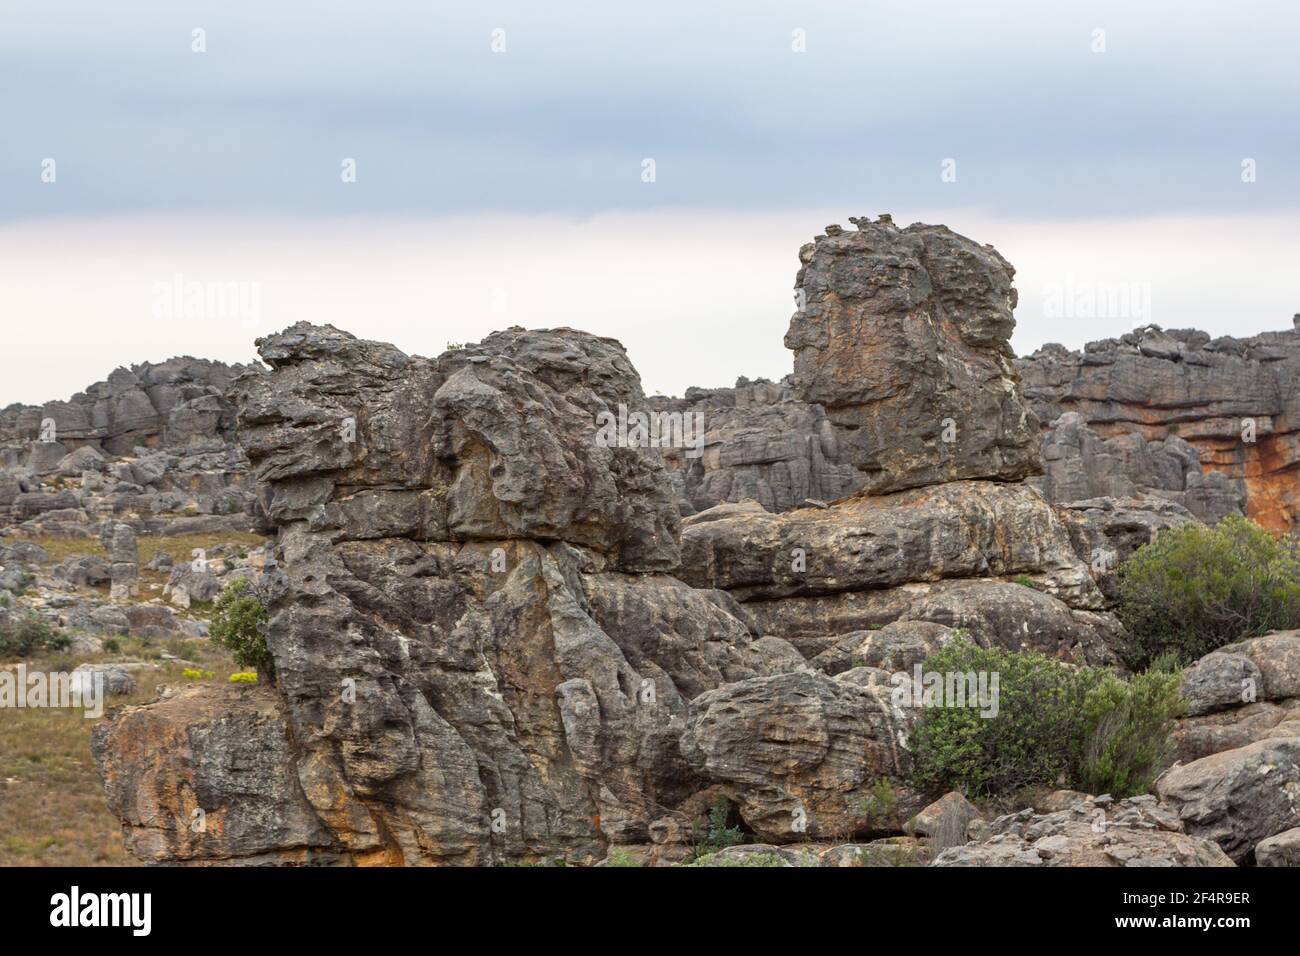 Interesting stone formation, that looks like faces, in the Cederberg Mountains in the Western Cape of South Africa Stock Photo